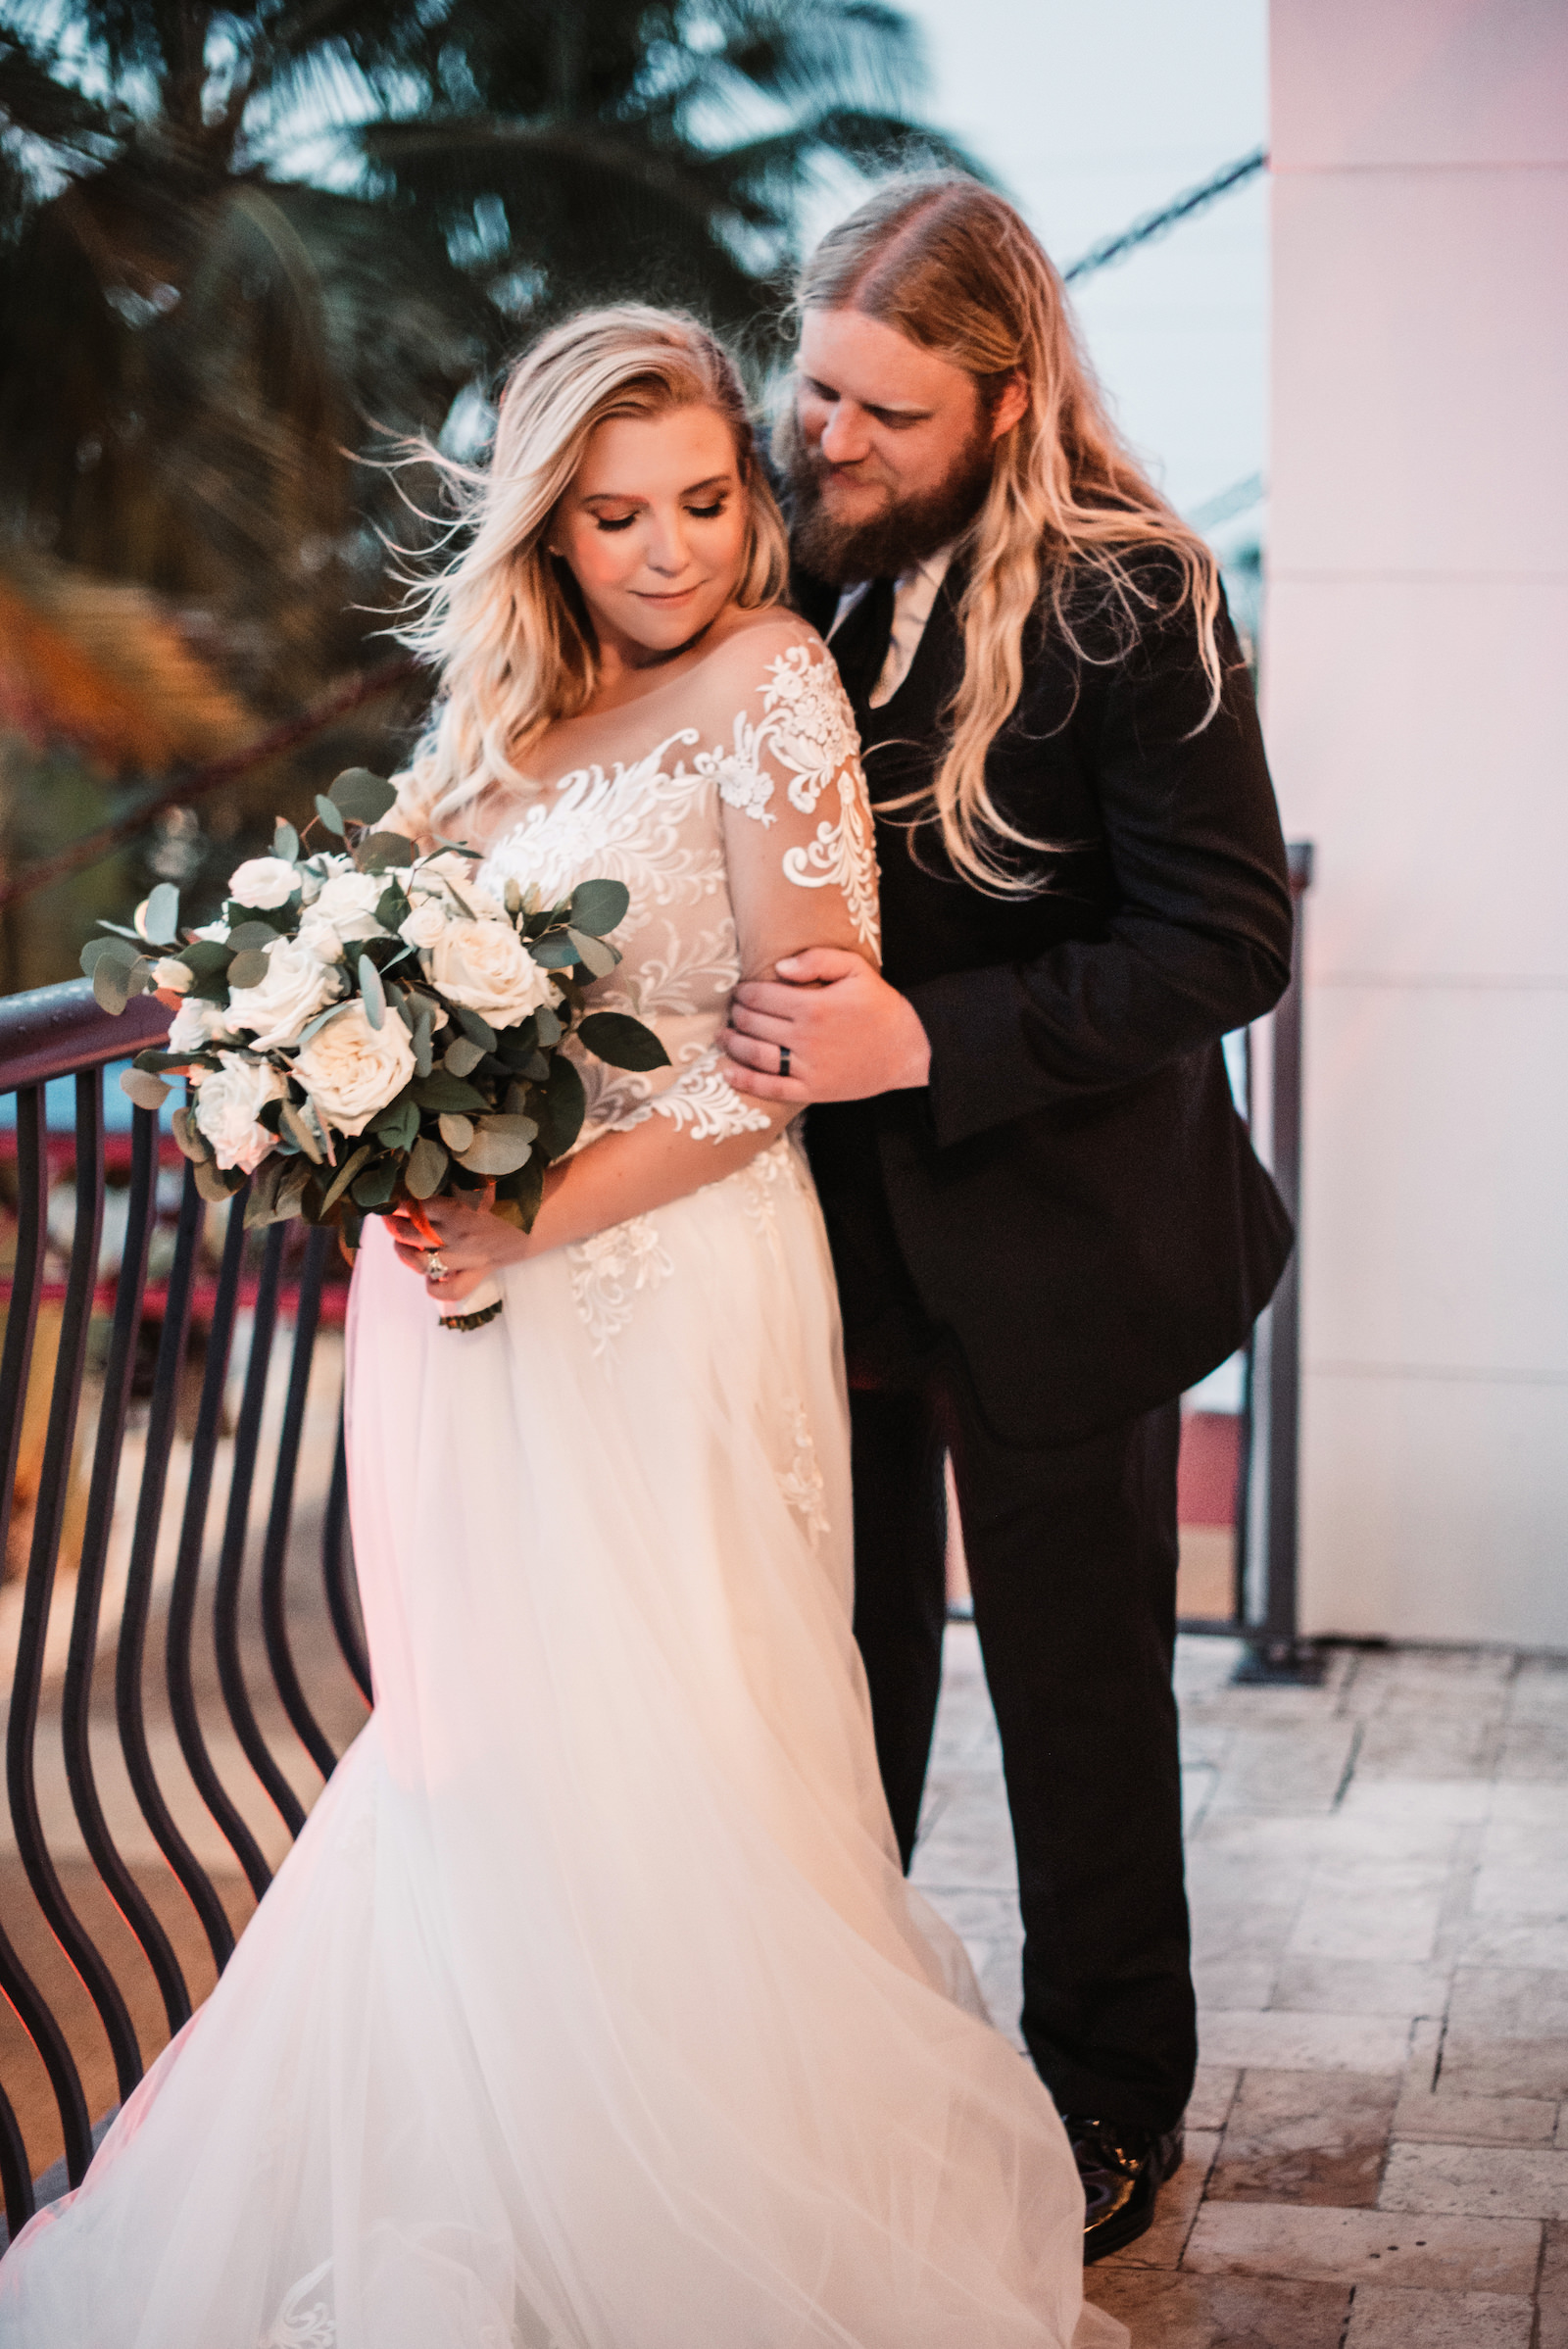 Tampa Bride Wearing Lace and Illusion Long Sleeve Wedding Dress Holding Neutral White Roses and Eucalyptus Floral Bouquet and Groom in Black Suit | St. Pete Wedding Venue The Hotel Zamora | Wedding Florist Iza's Flowers